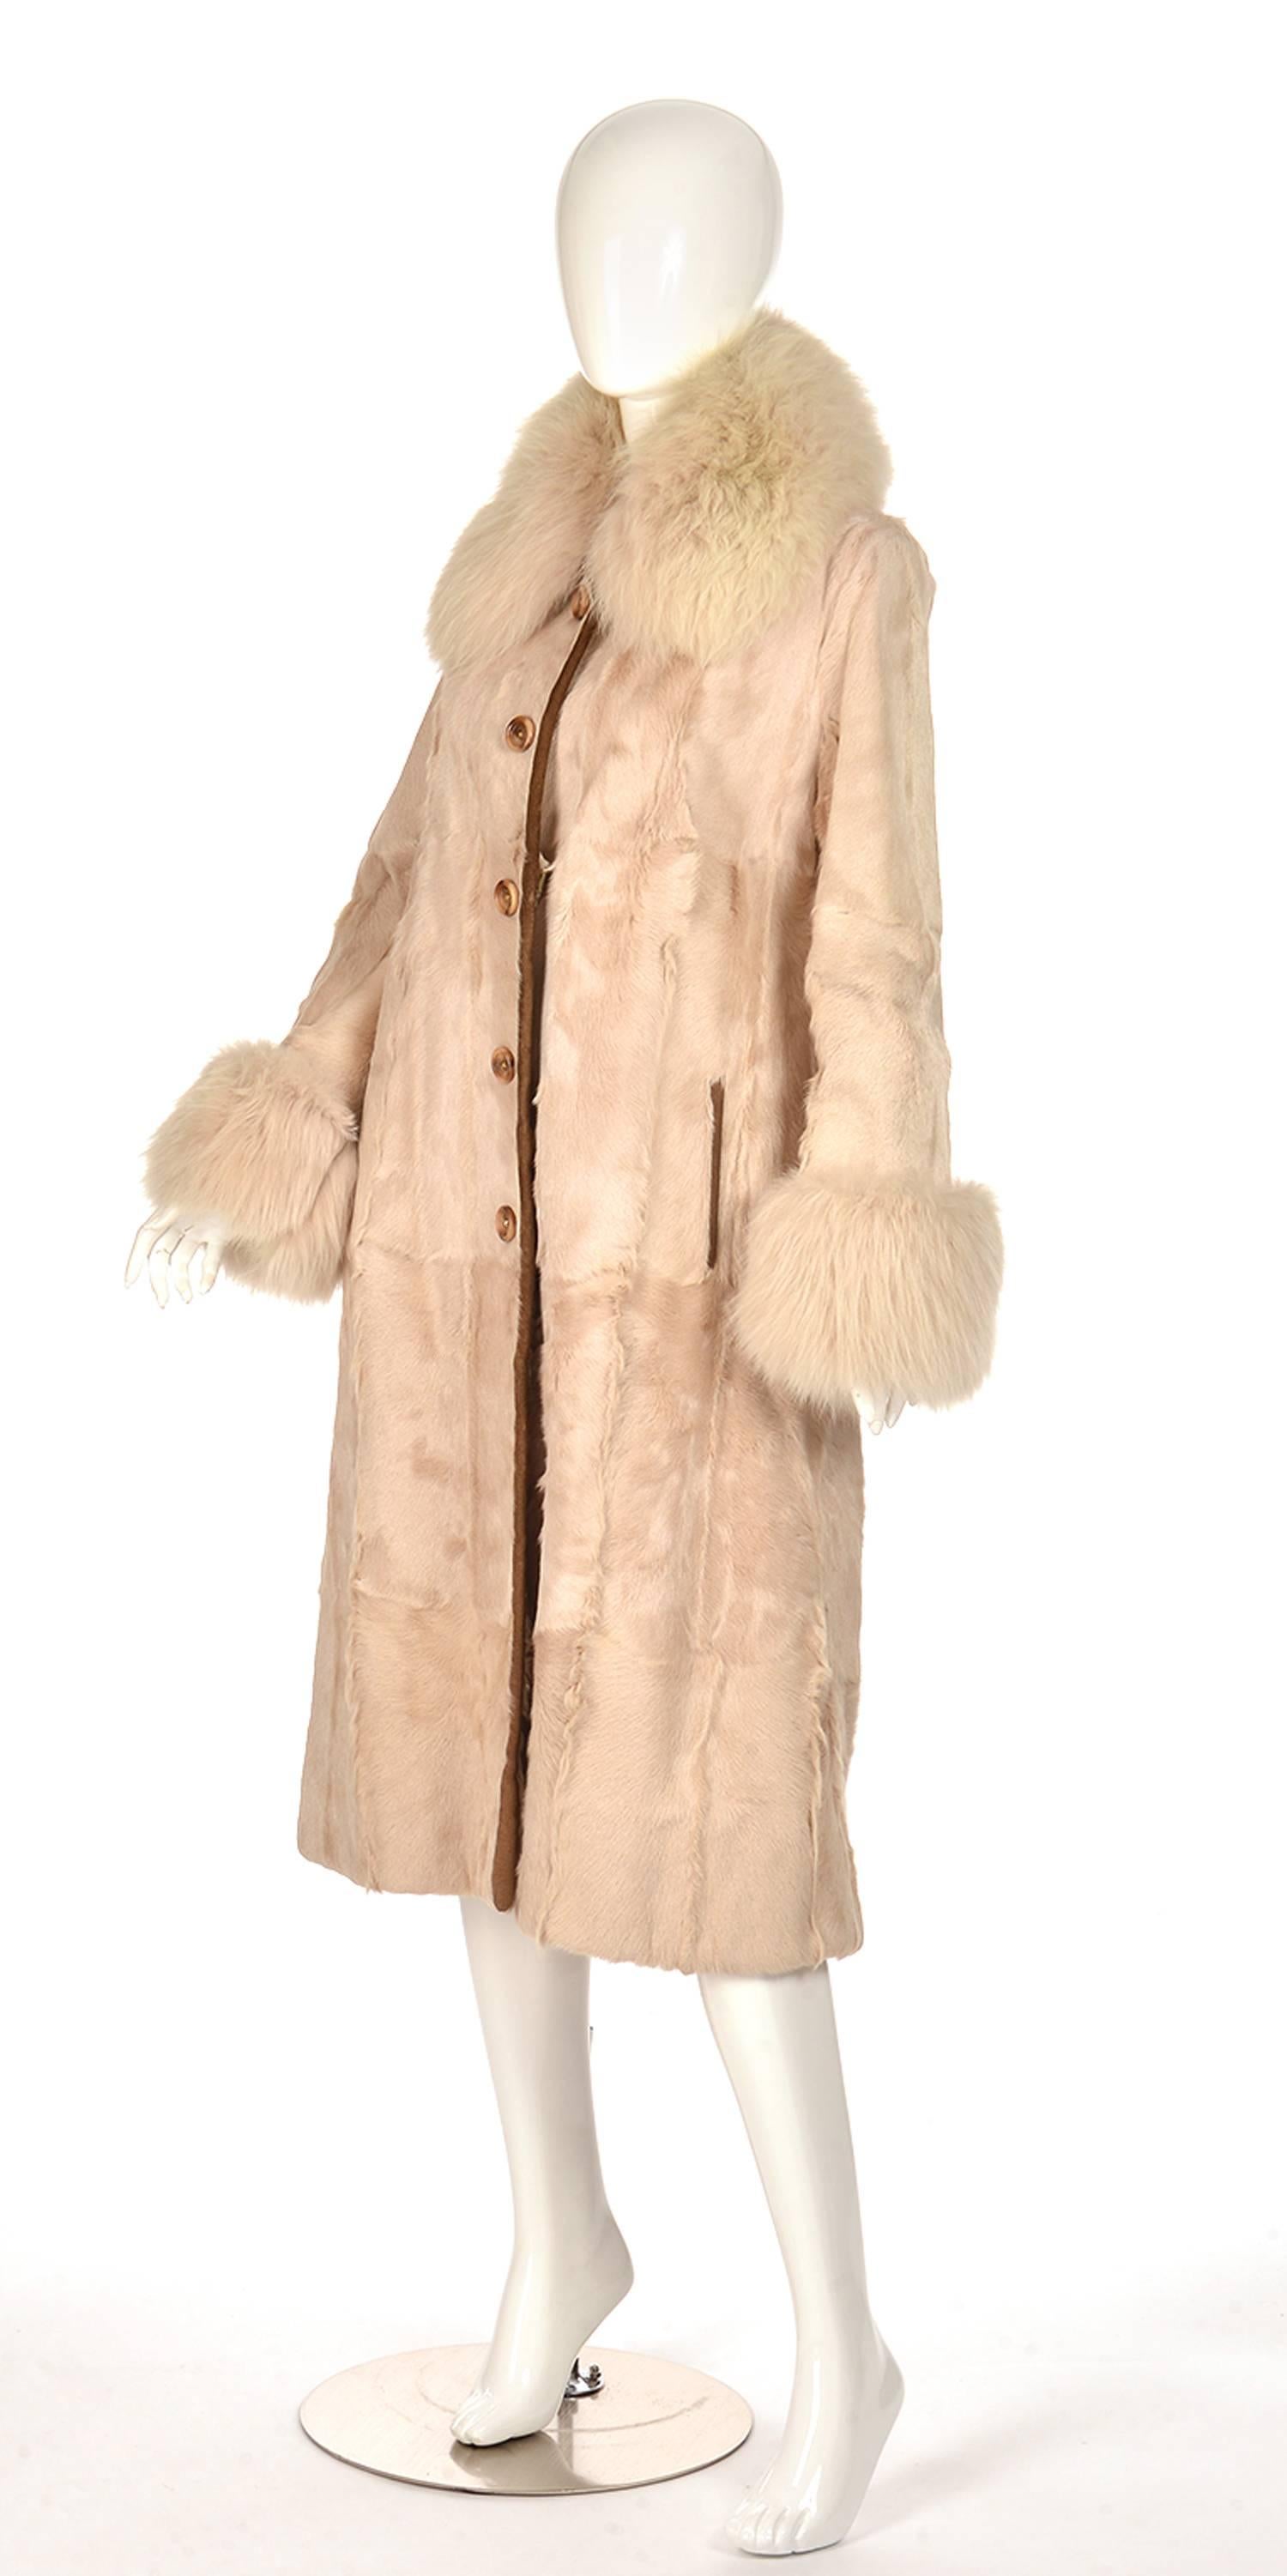 
Gorgeous midi length angora rabbit and calf fur coat. The coat primarily consists of bisque-colored calf fur, and is accented with vanilla-colored rabbit fur at the collar and wrists. The coat features caramel-colored leather piping accenting the